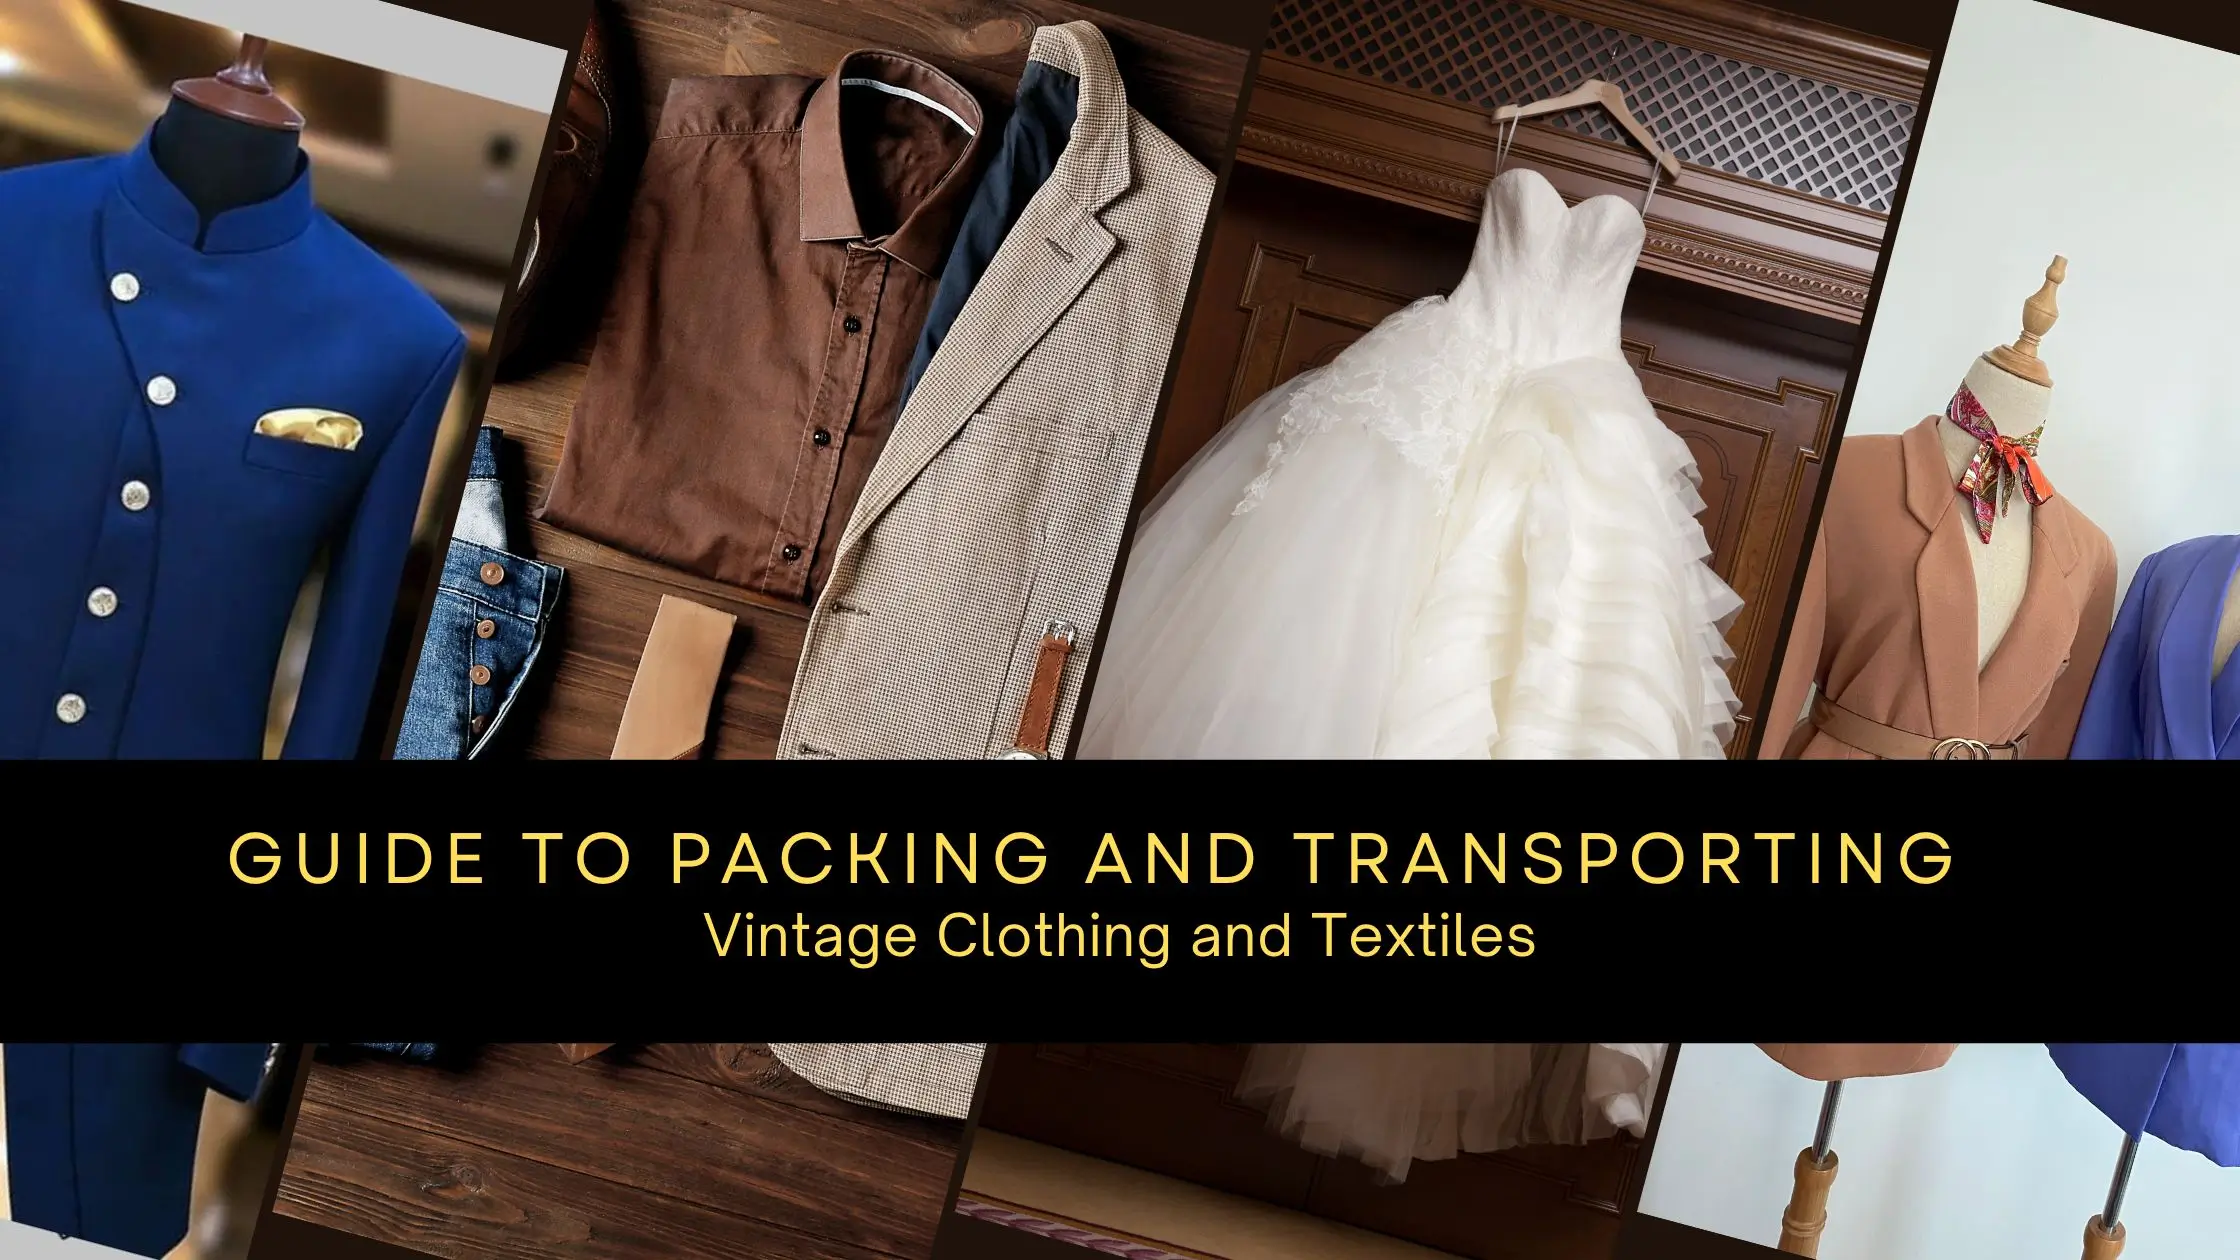 Guide to Packing and Transporting Vintage Clothing and Textiles